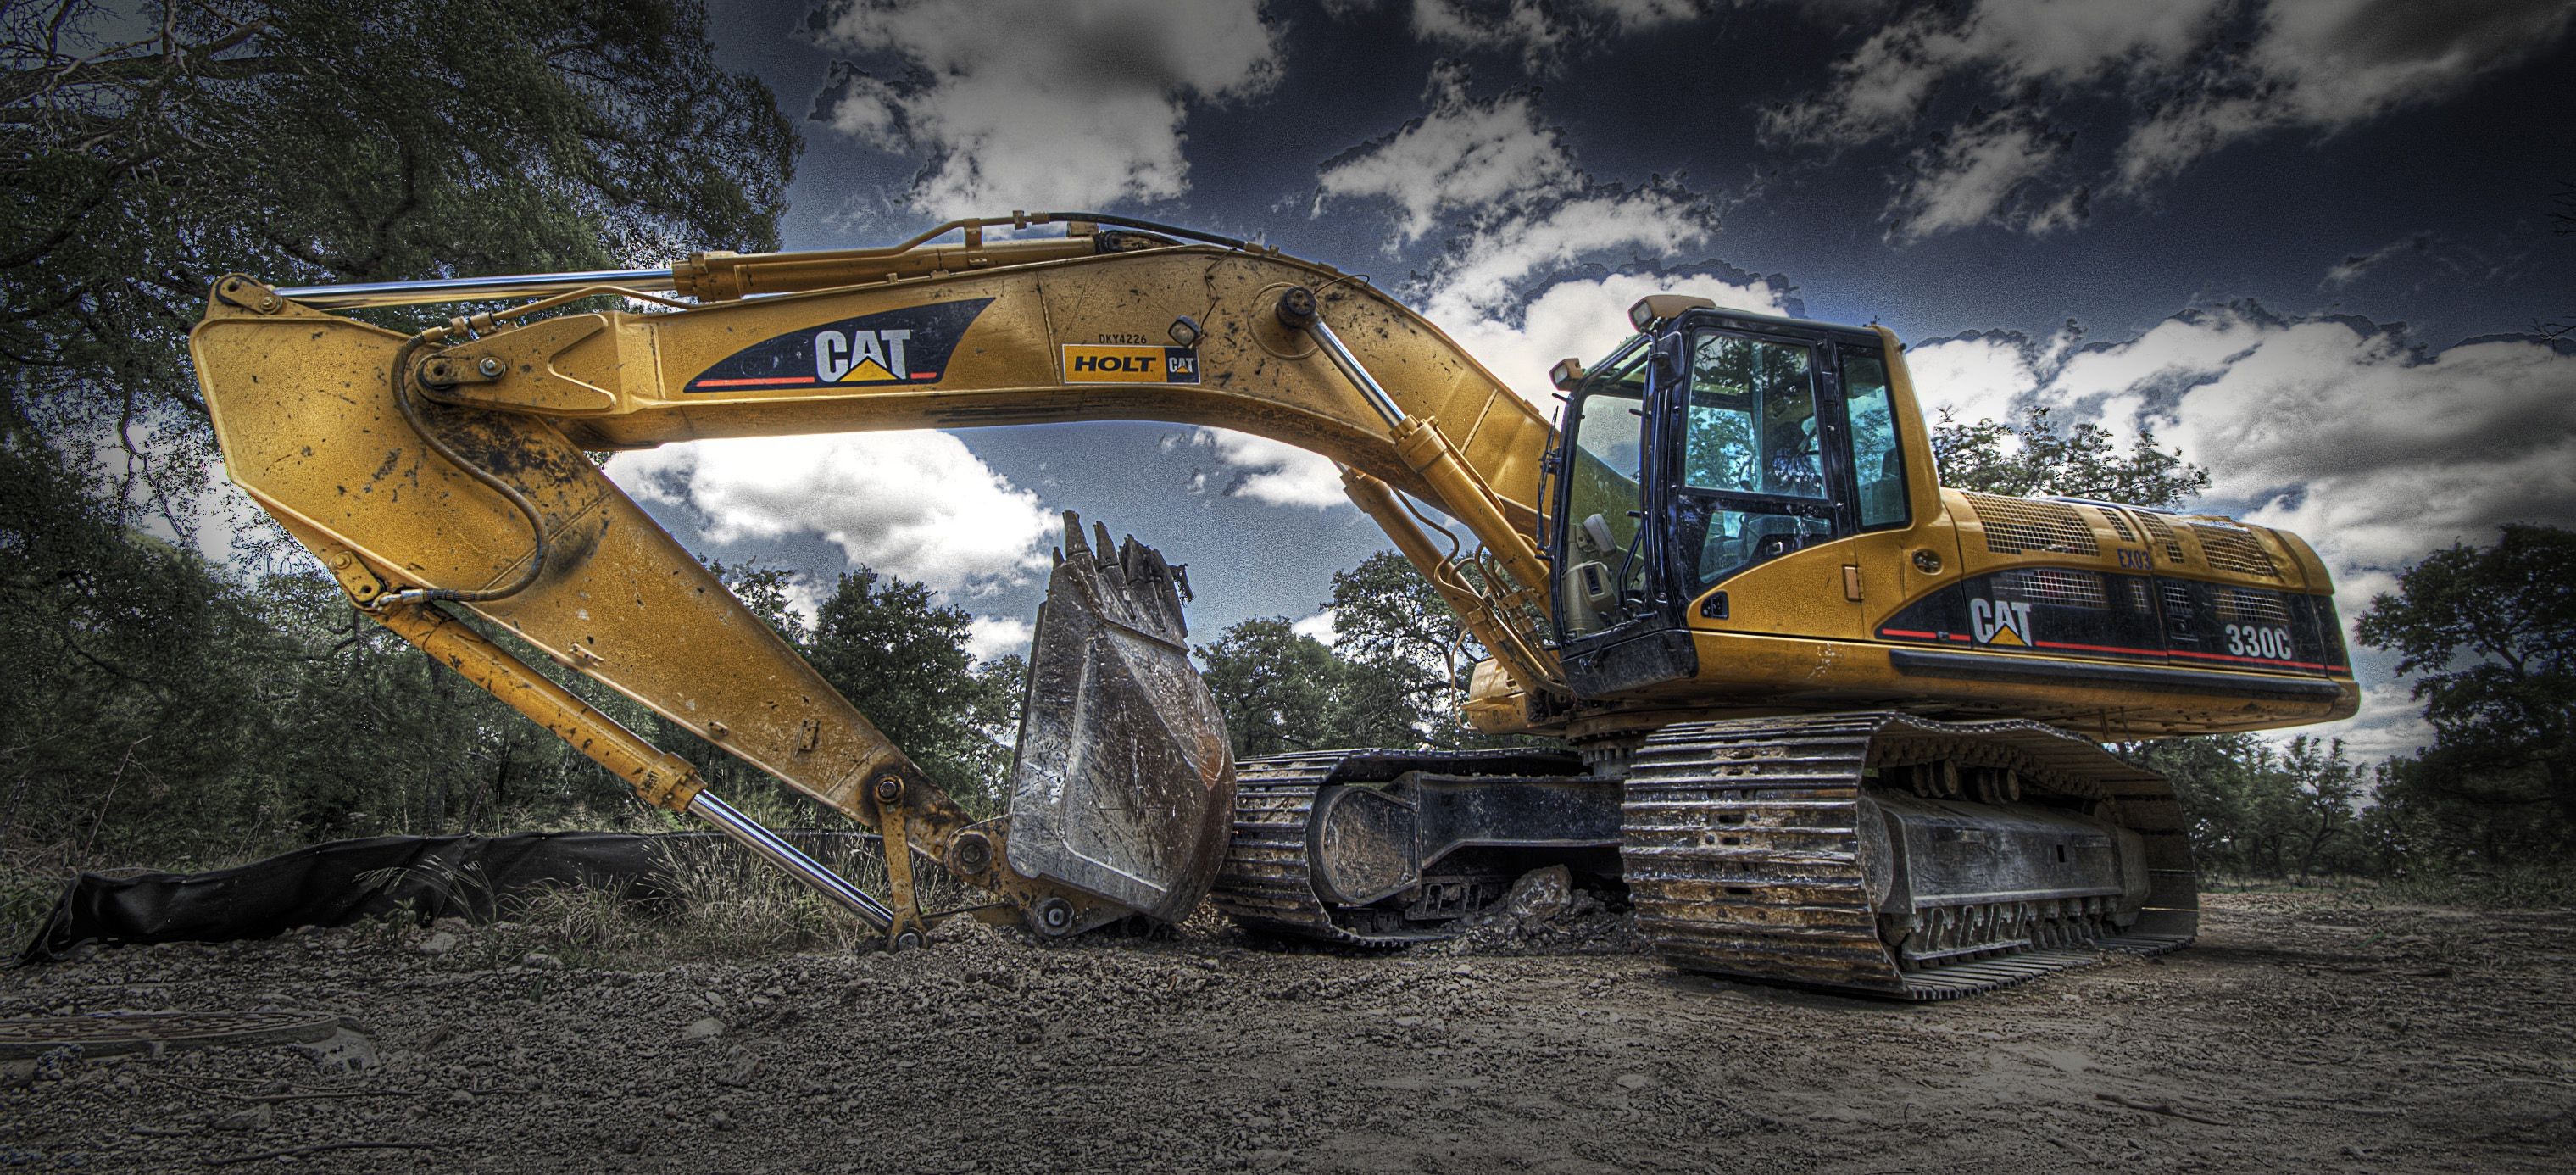 Top 10 Best Excavator Brands For Your Construction Company